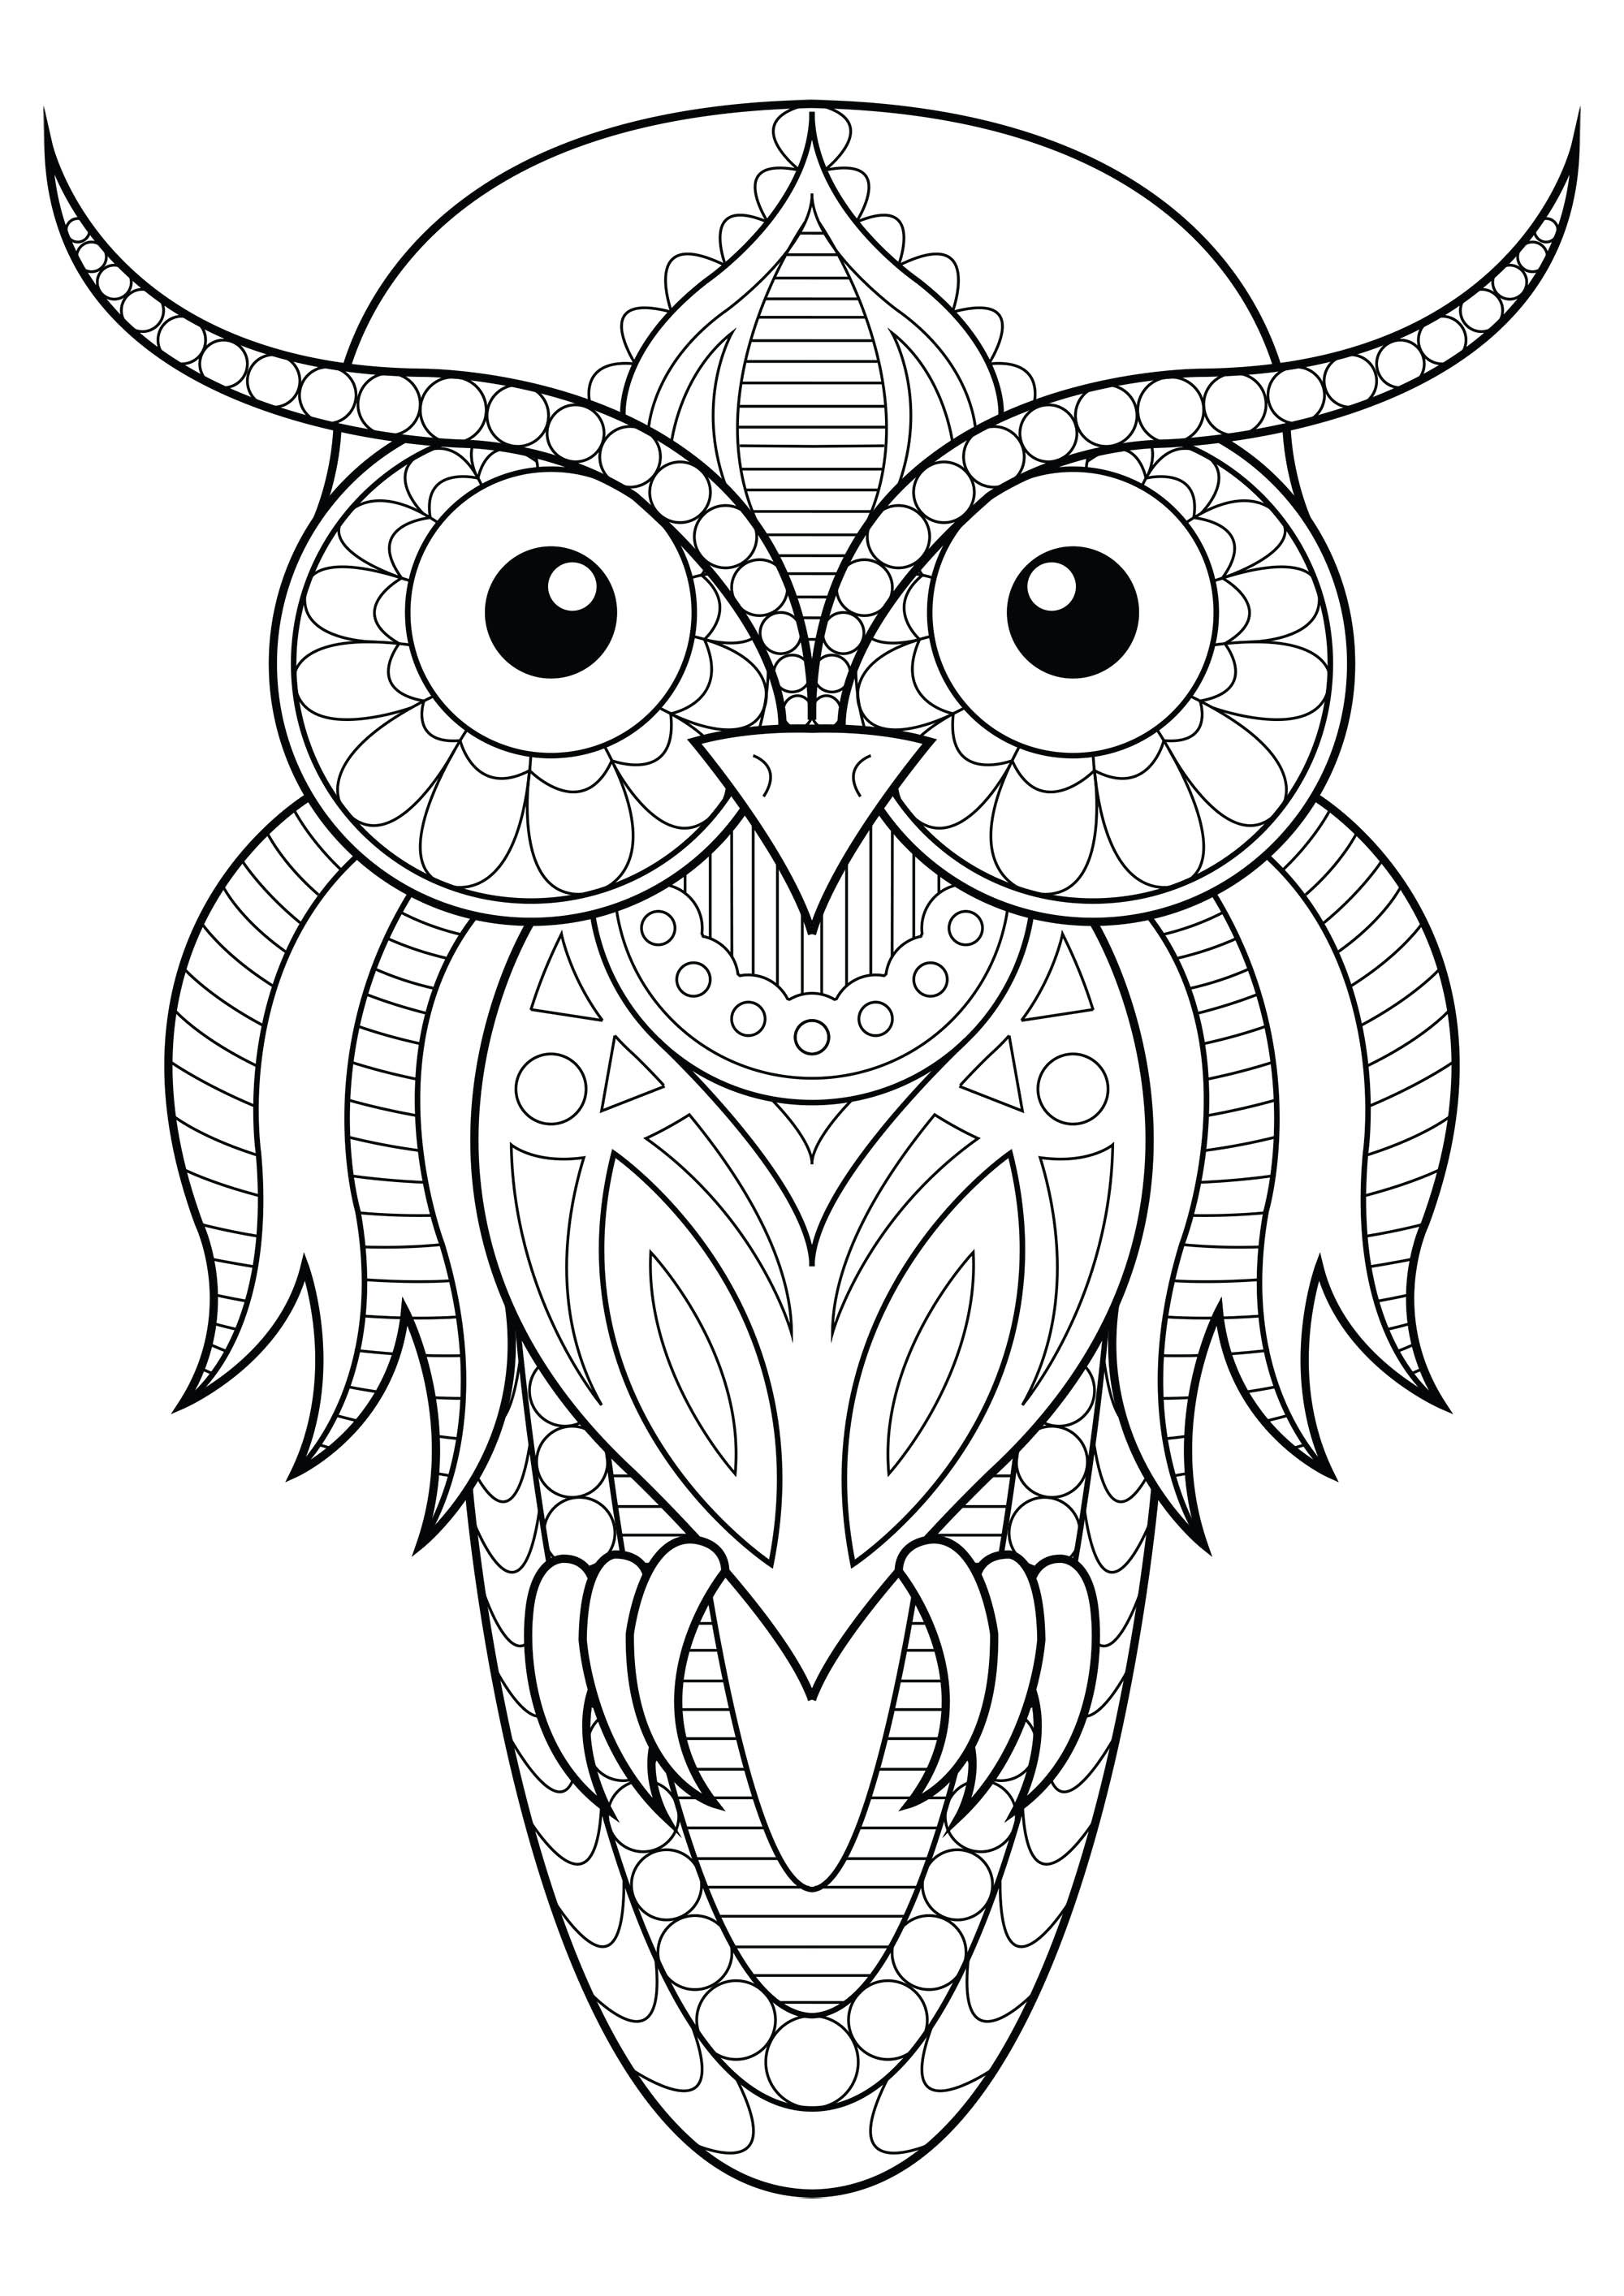 Owl simple patterns 1 - Owls Adult Coloring Pages